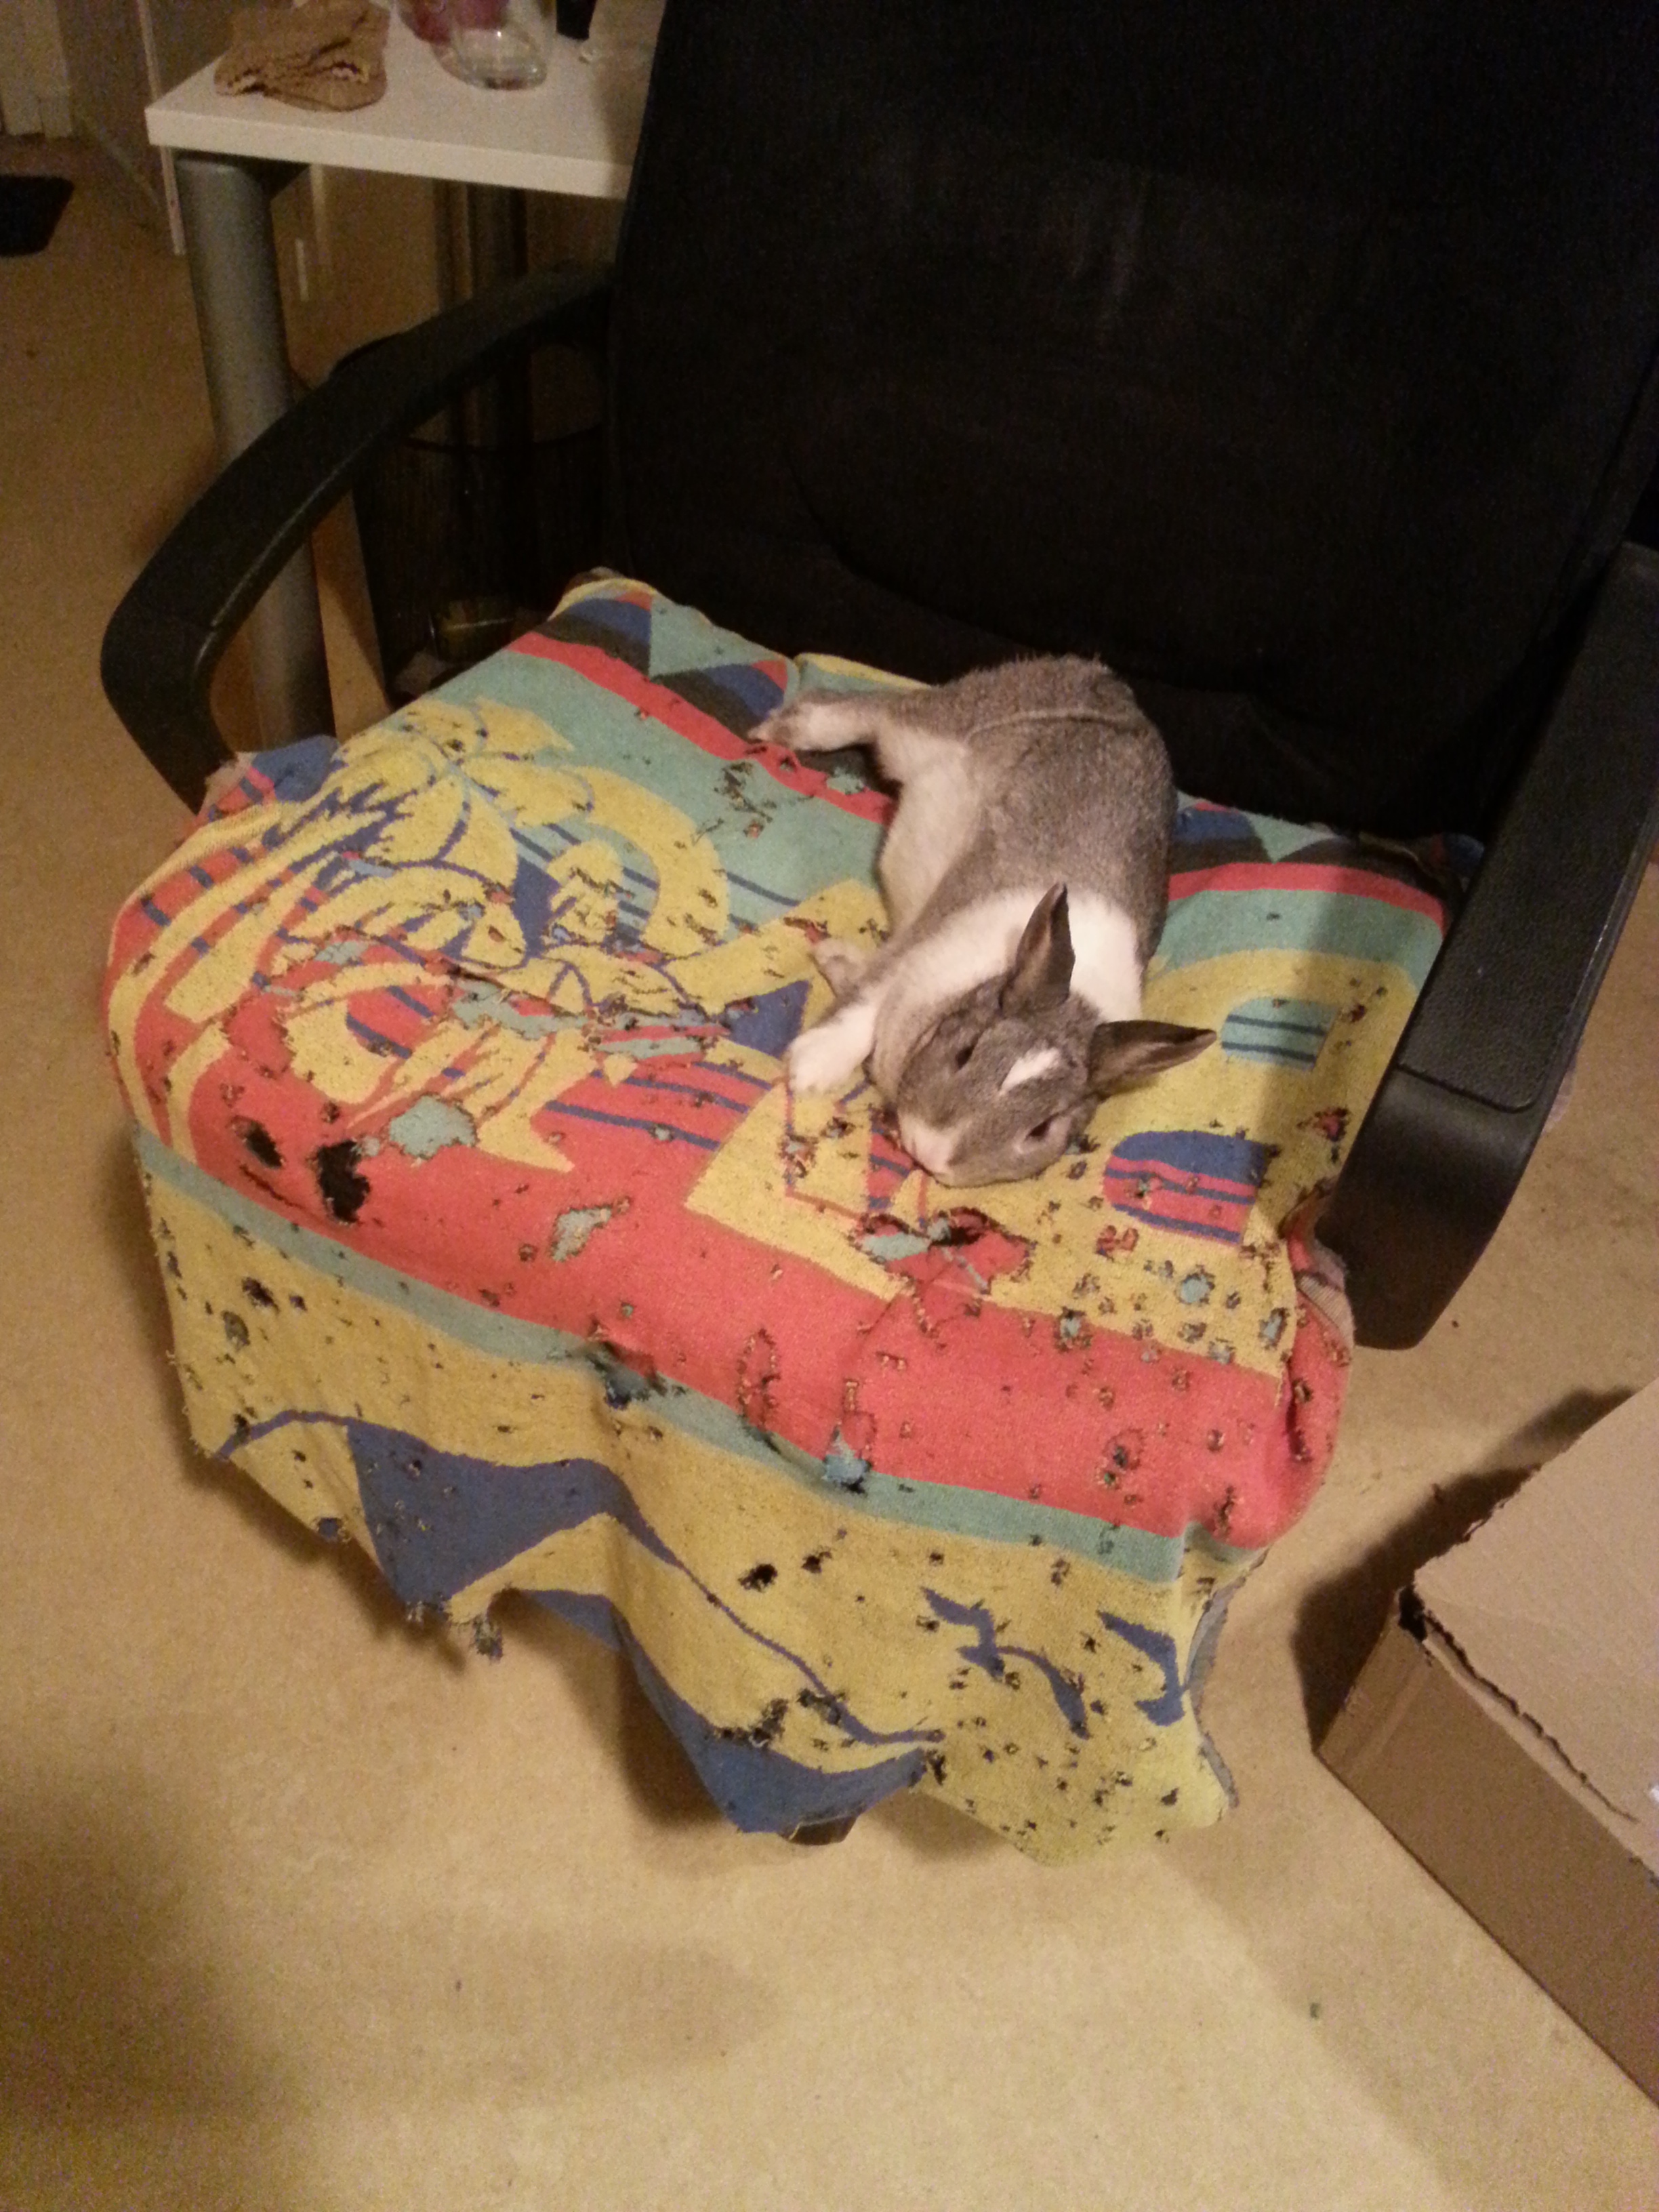 Epically flopping bunny